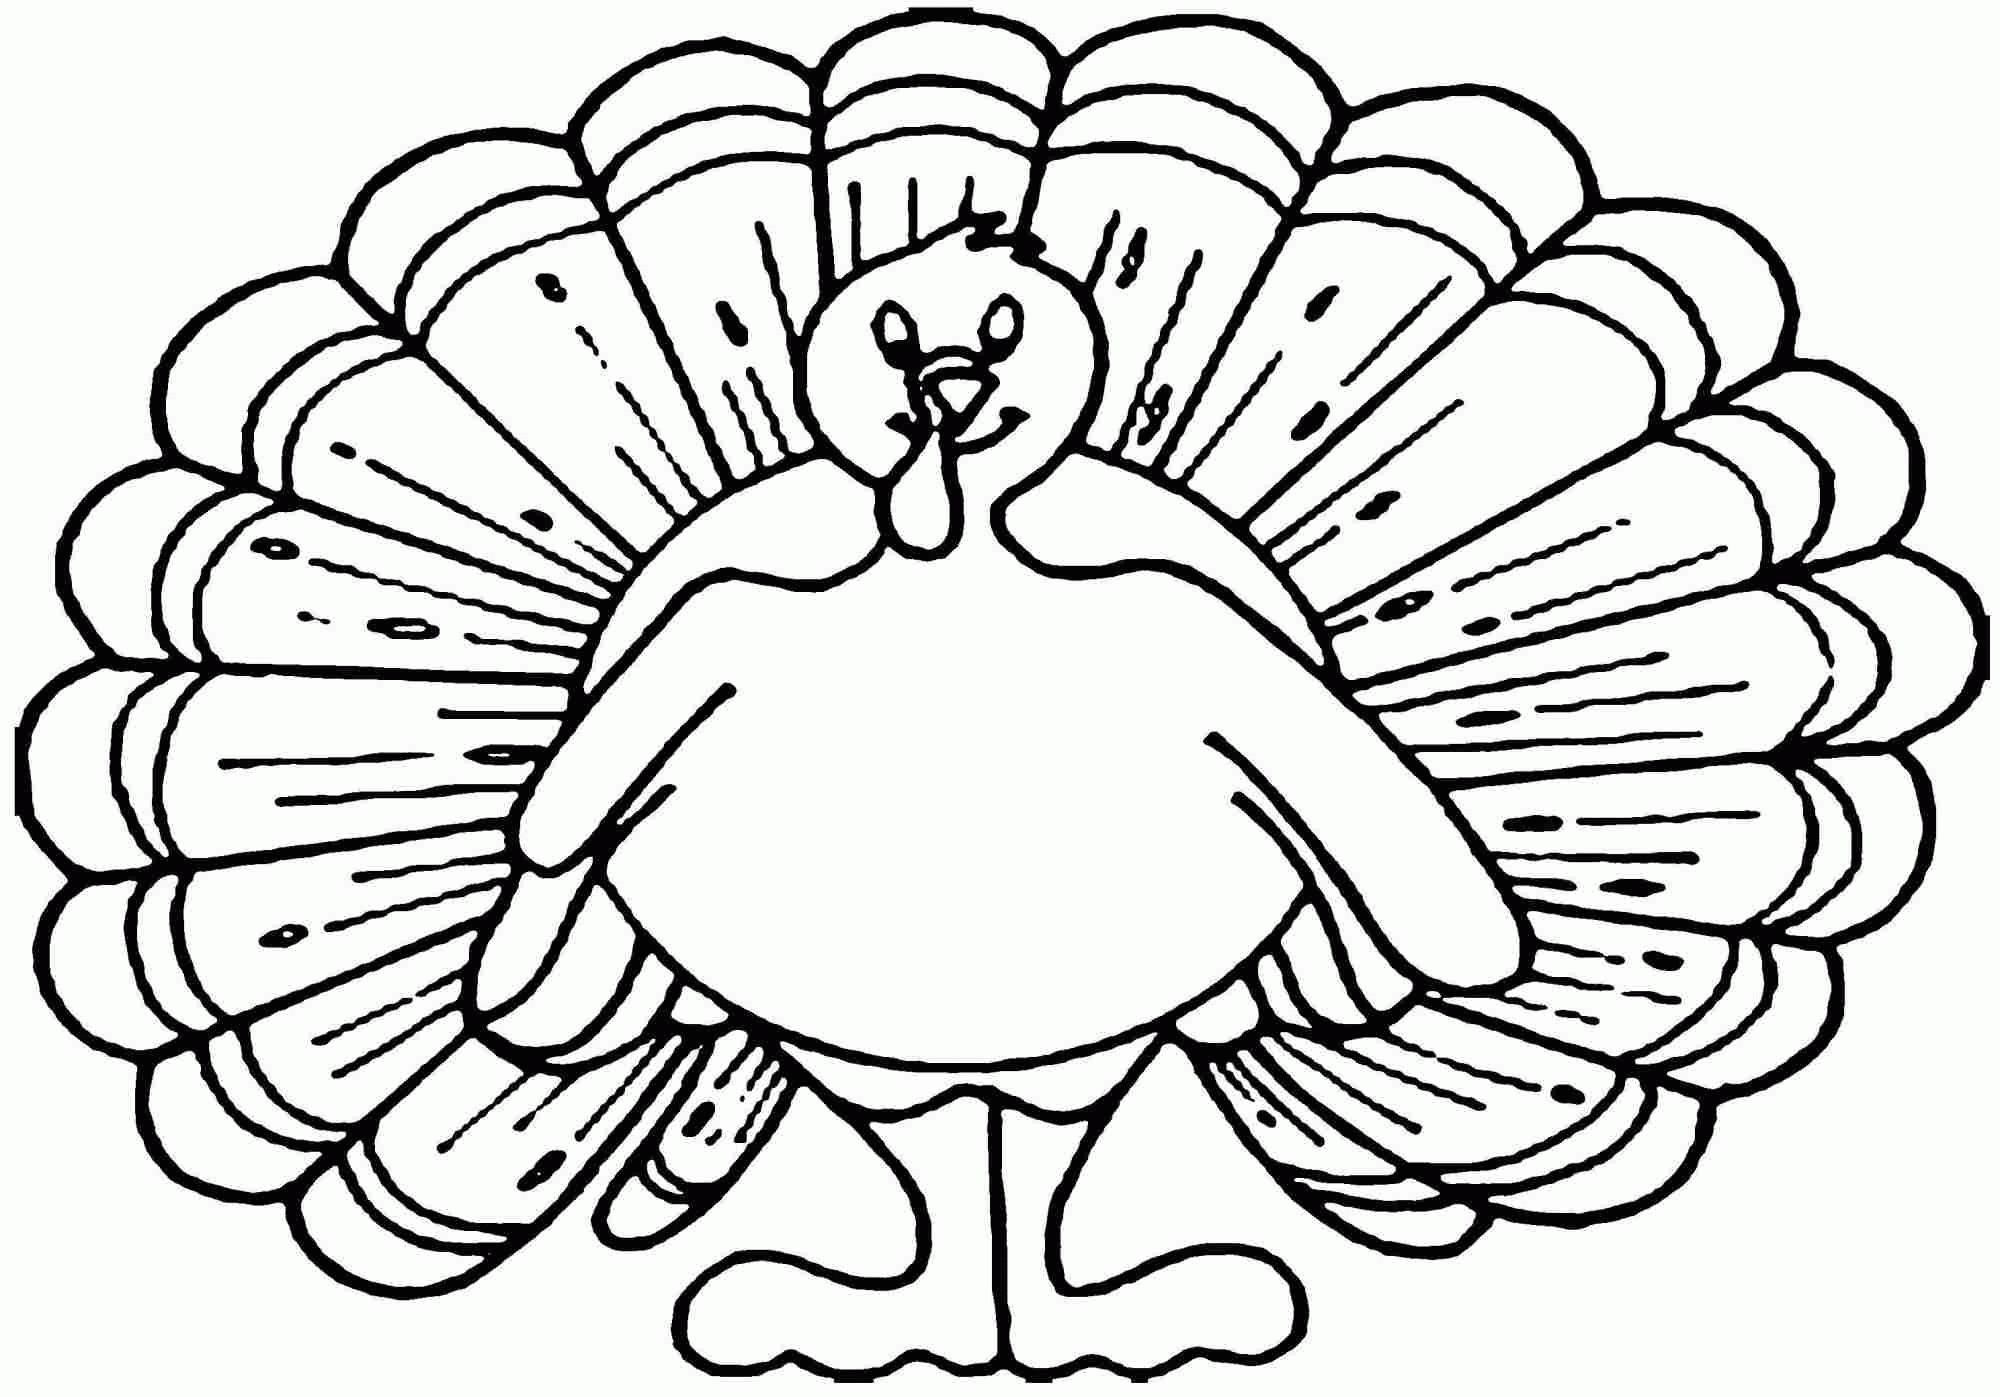 Free Printable Turkey Coloring Pages